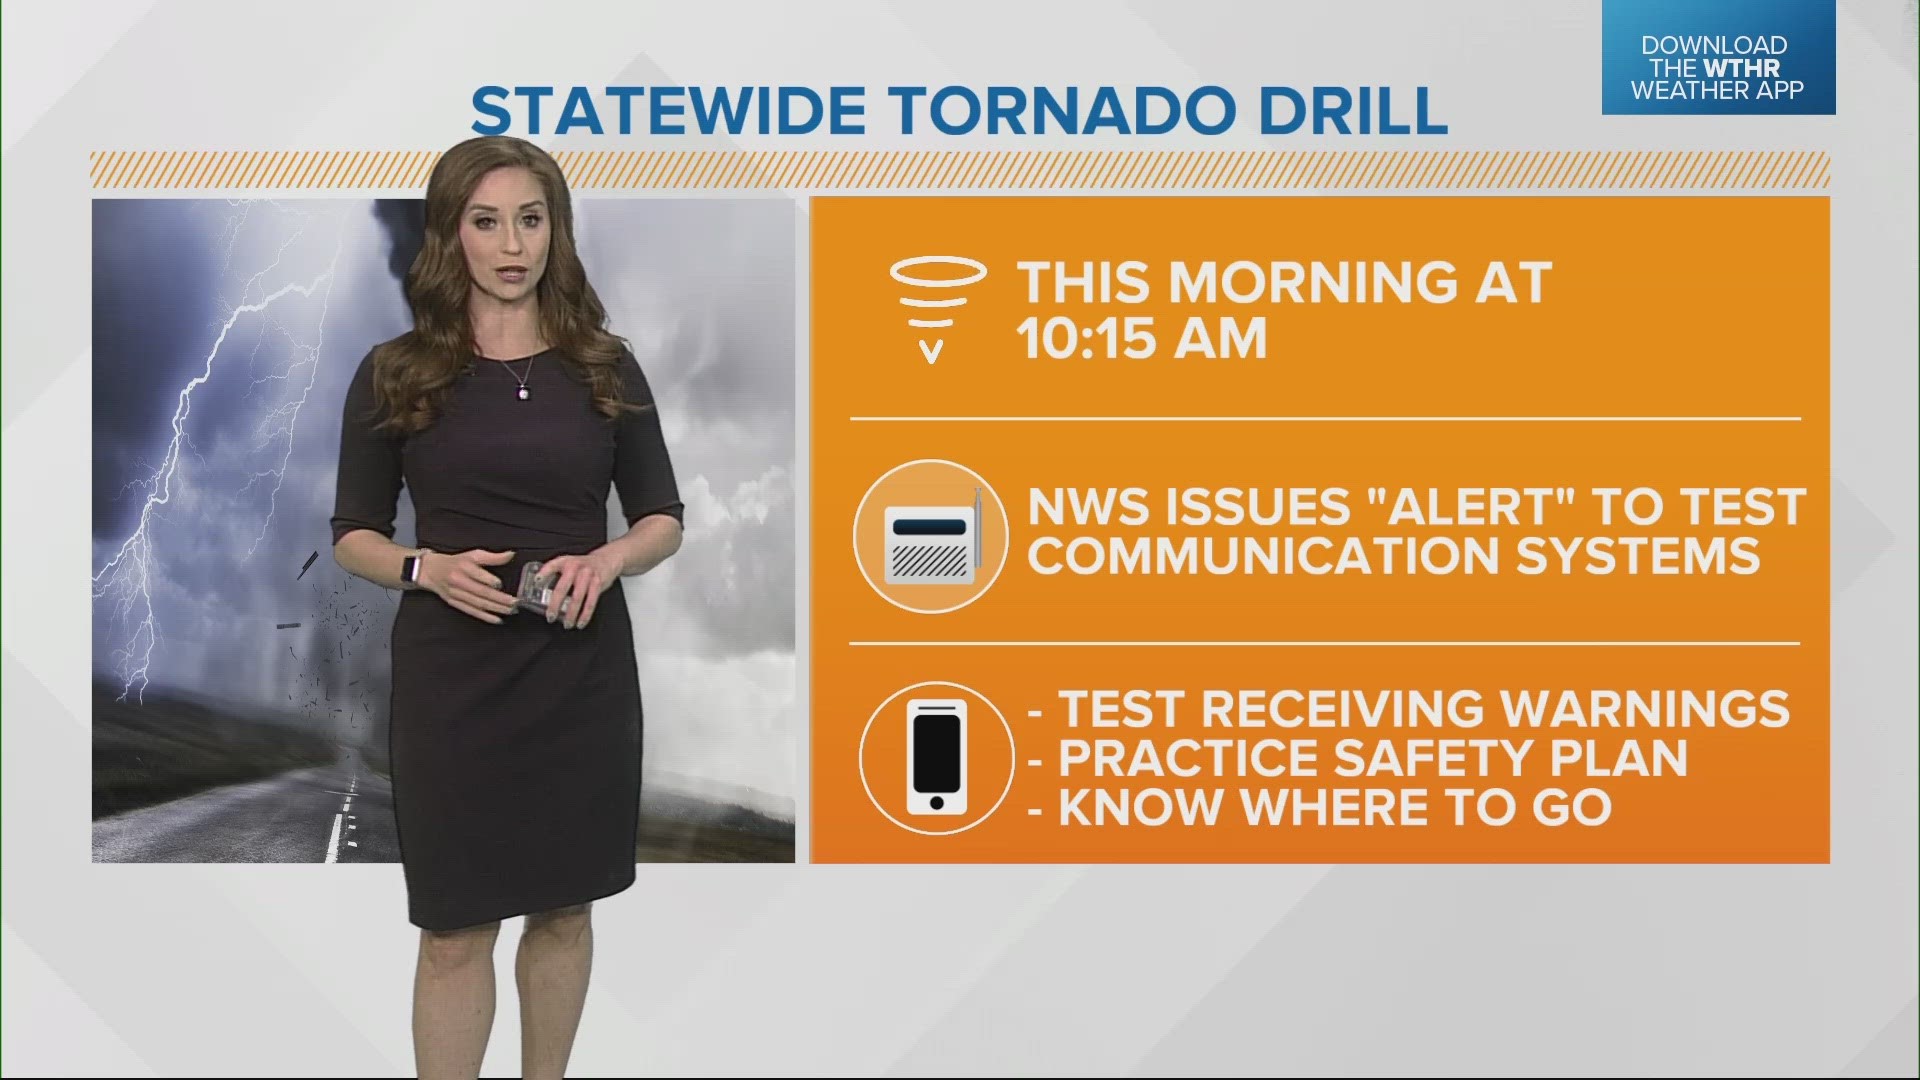 This is an opportunity for you to make sure you have a way to receive warning information, be it from your phone, the WTHR Weather App, or a NOAA weather radio.